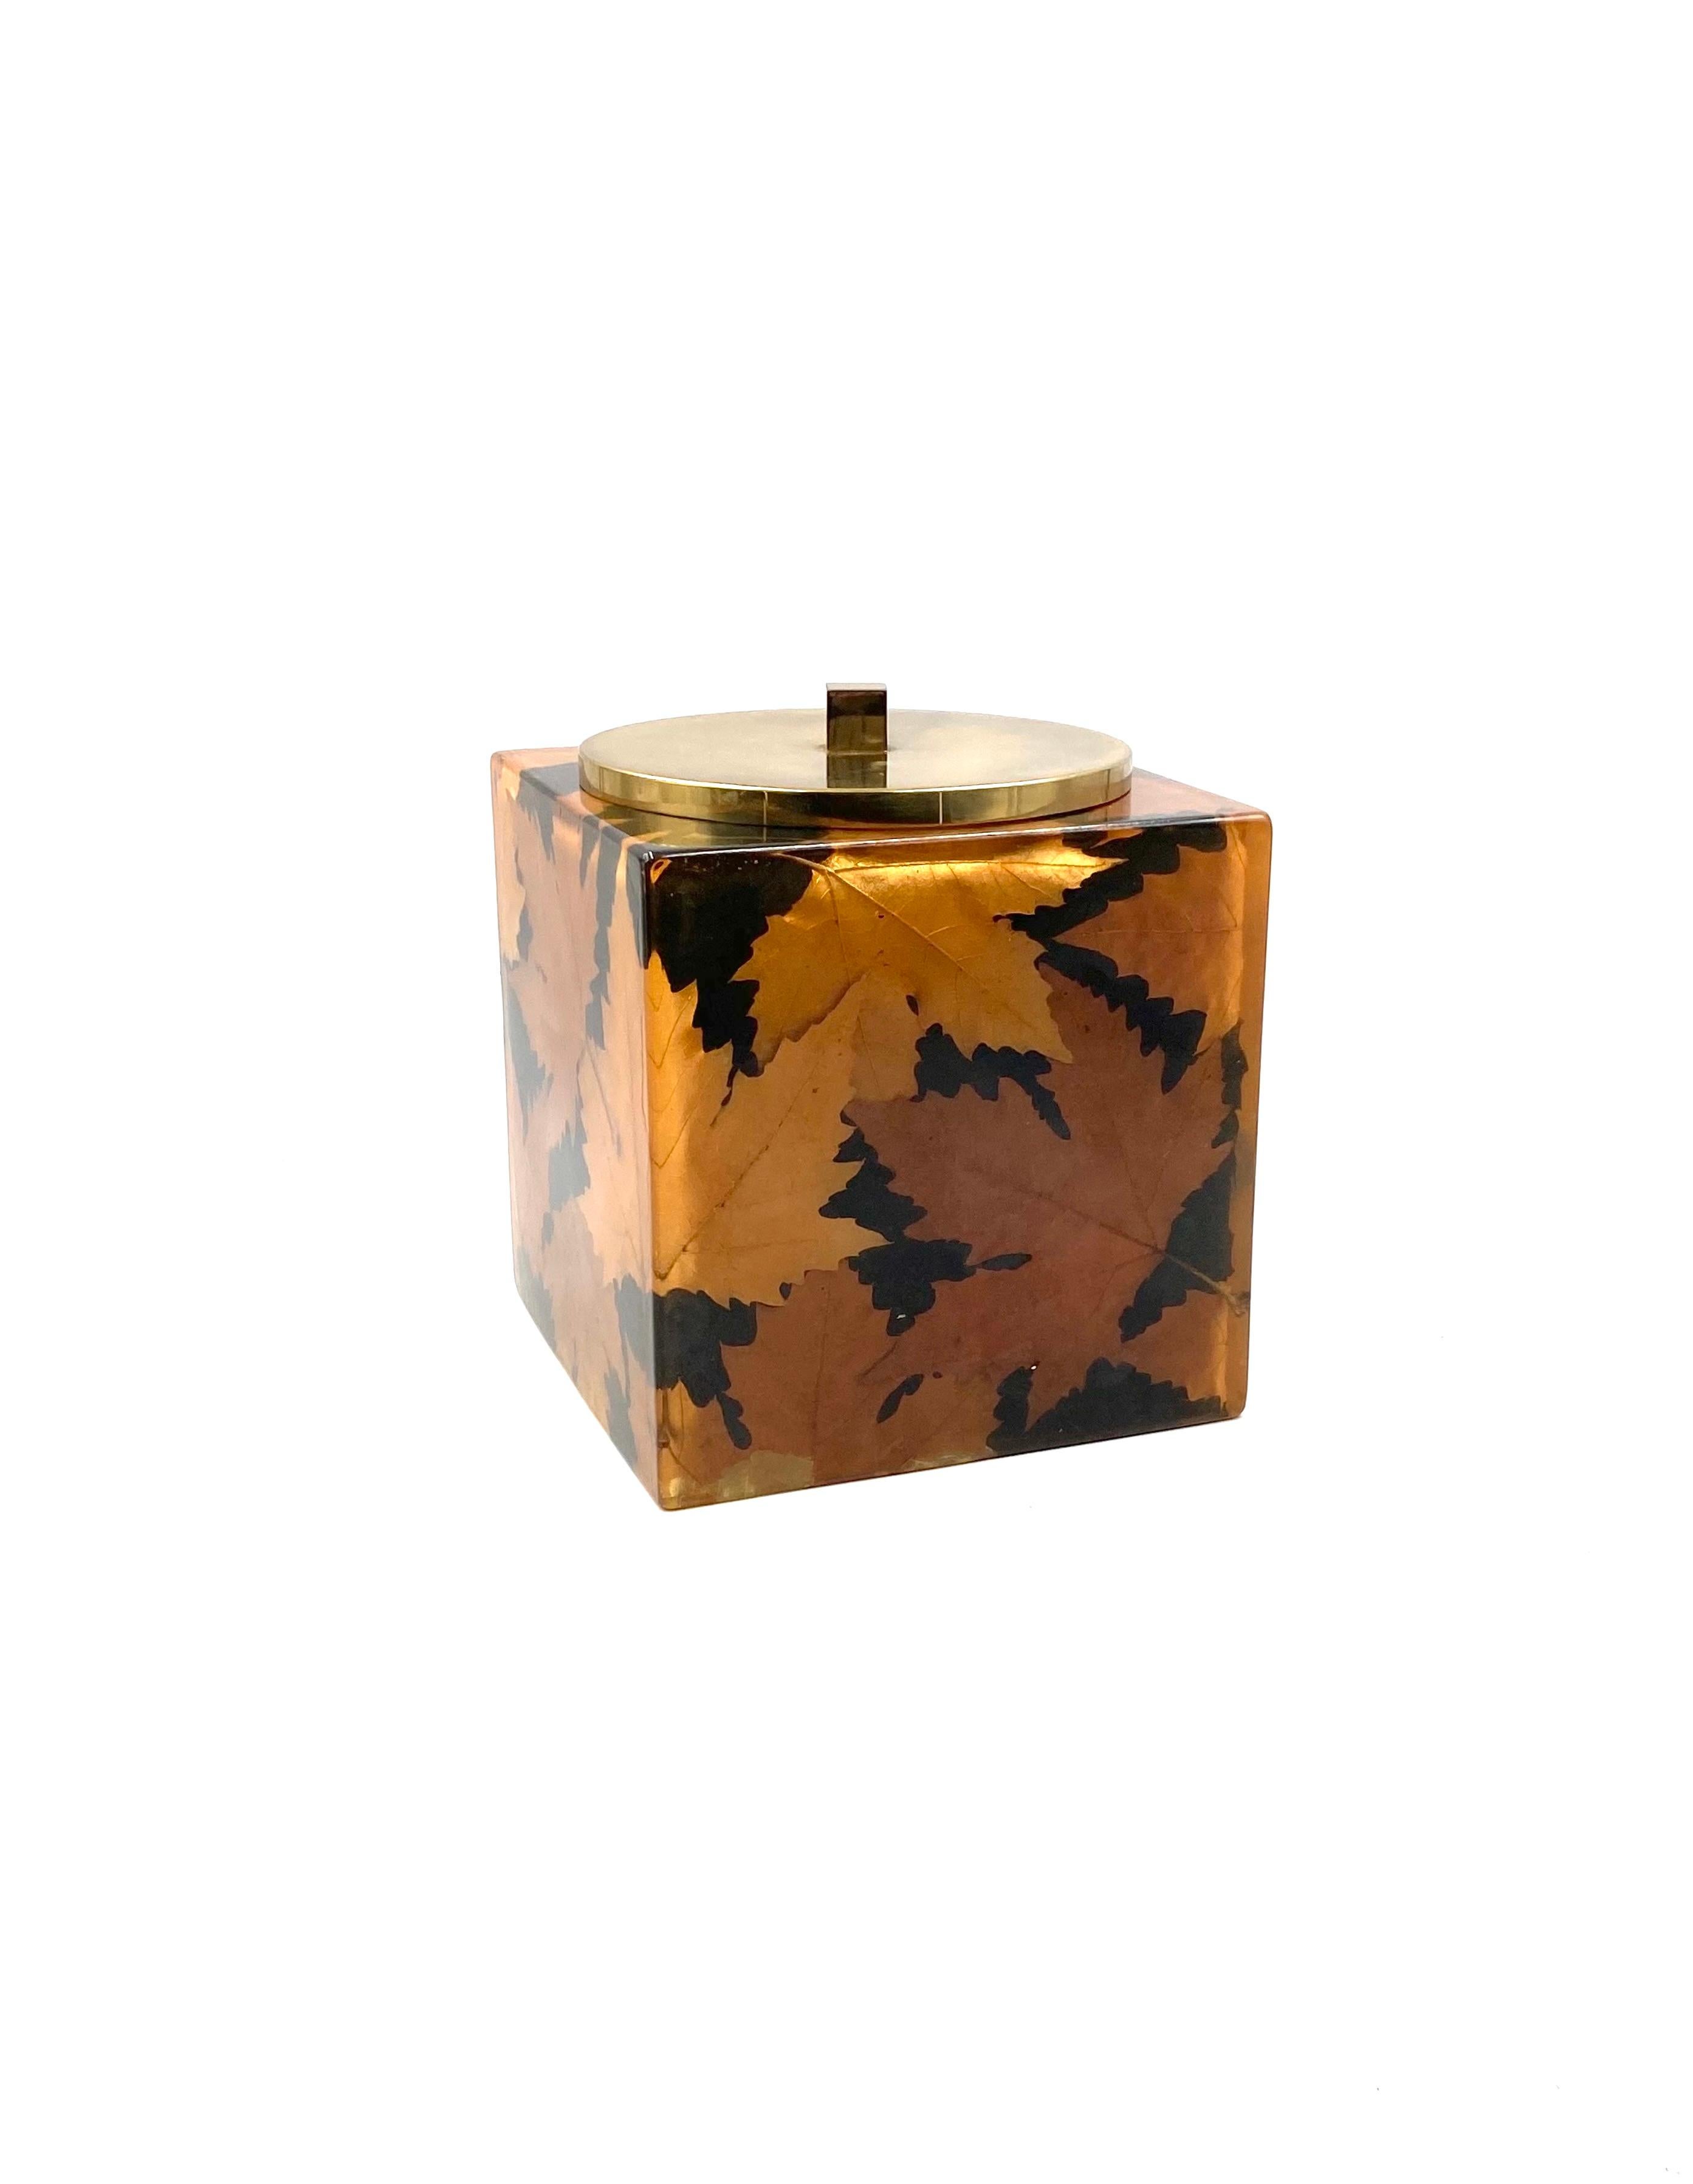 Hollywood regency brass and leaves resin ice bucket, Montagnani Florence 1970s For Sale 10